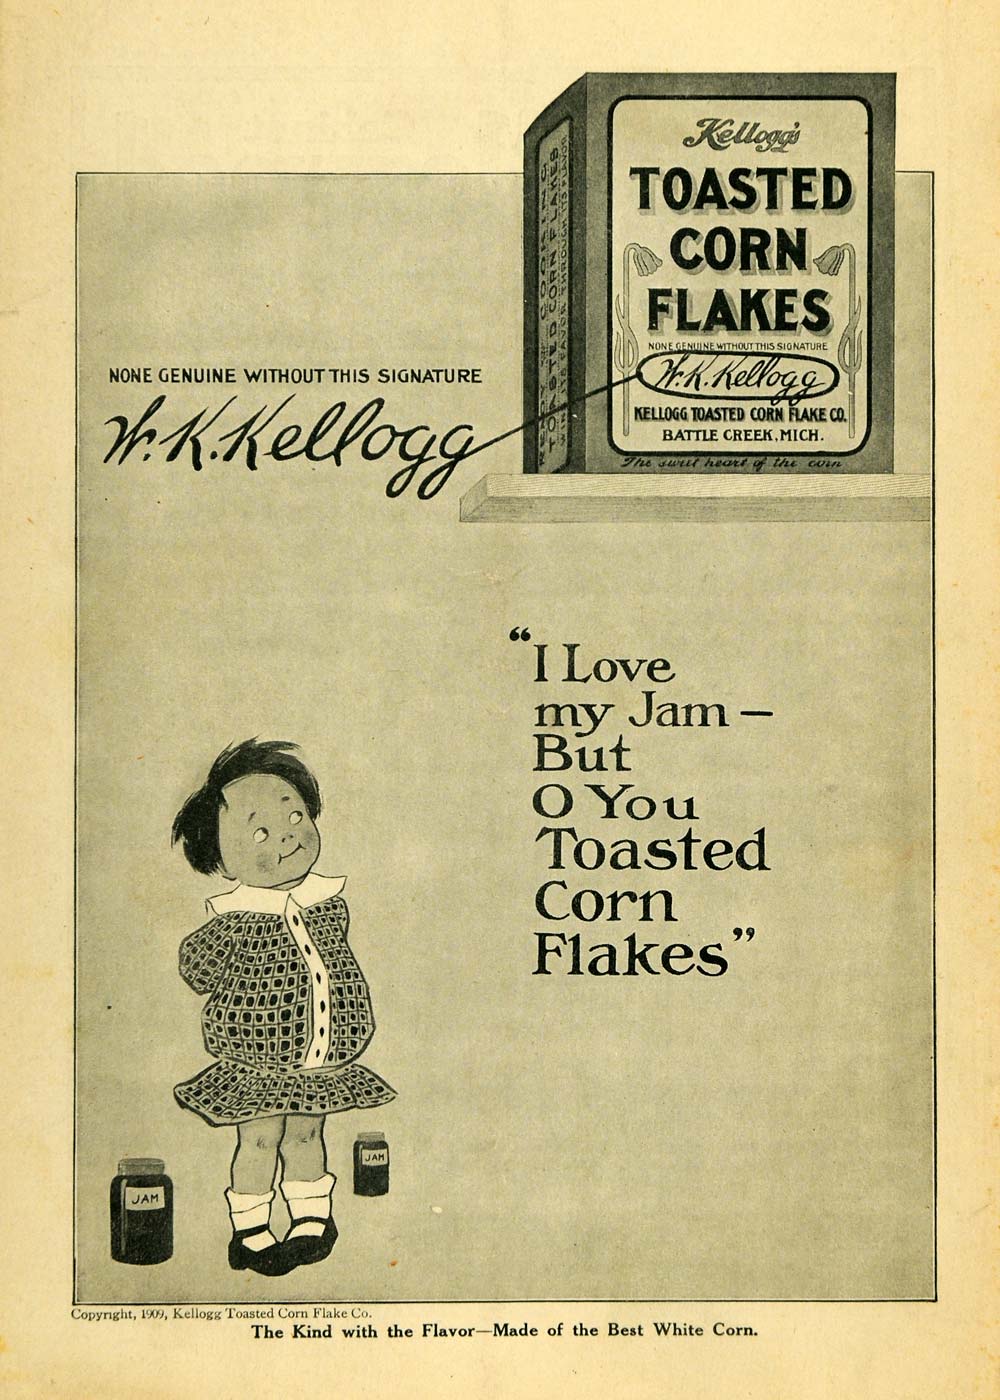 Illustrative image of the Kellogg's logo and famous branded corn